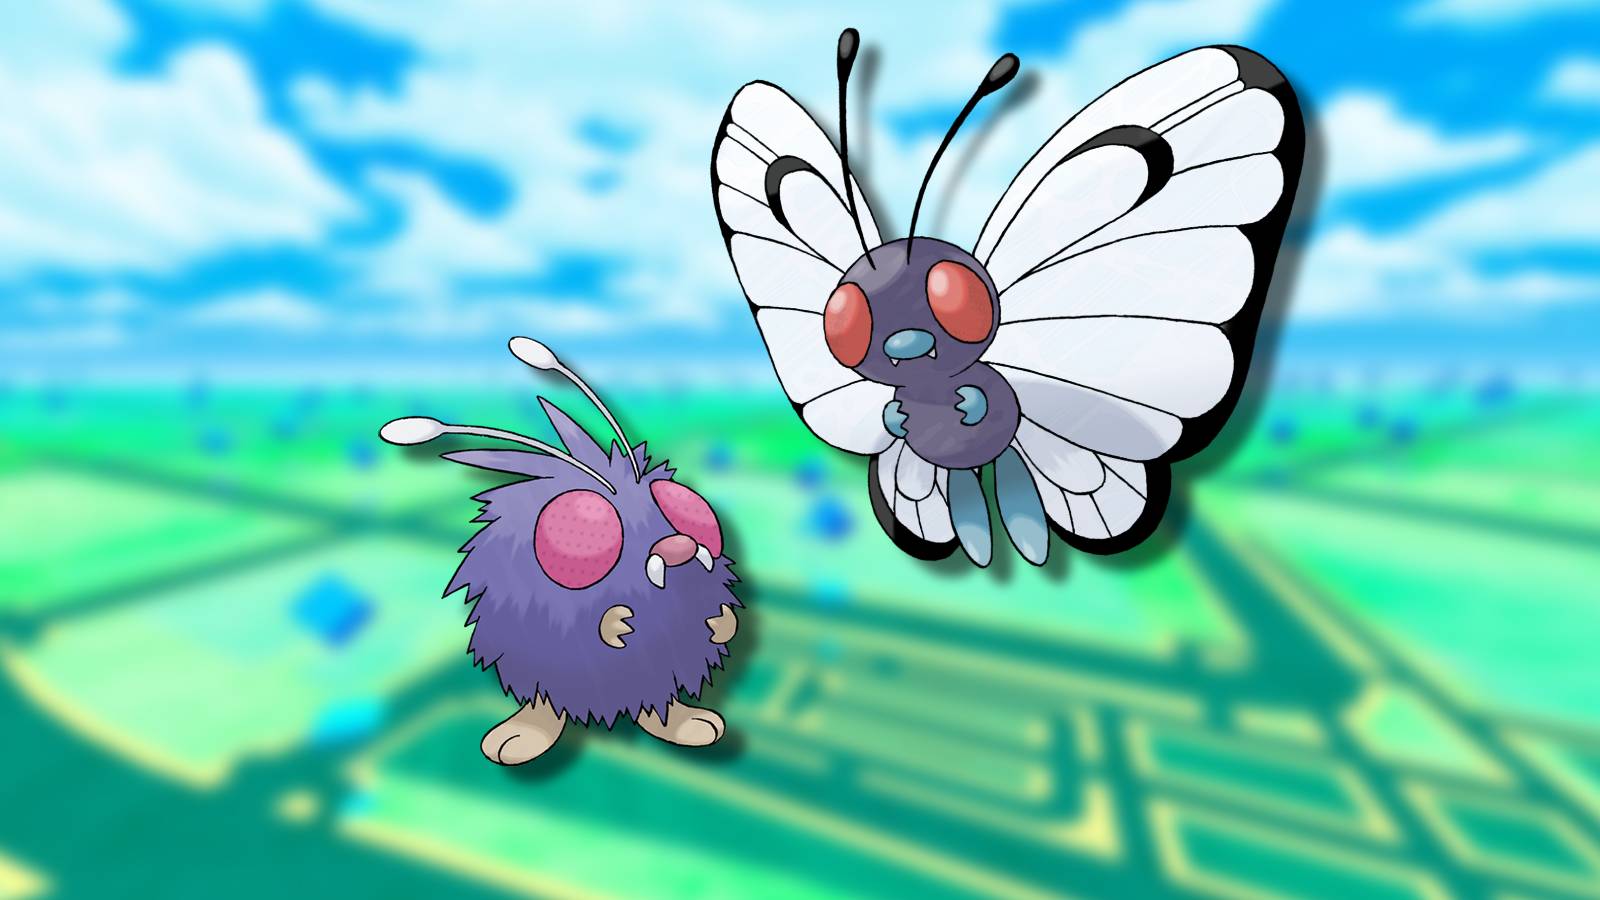 The Pokemon Venonat and Butterfree appear next to each other against a blurred background